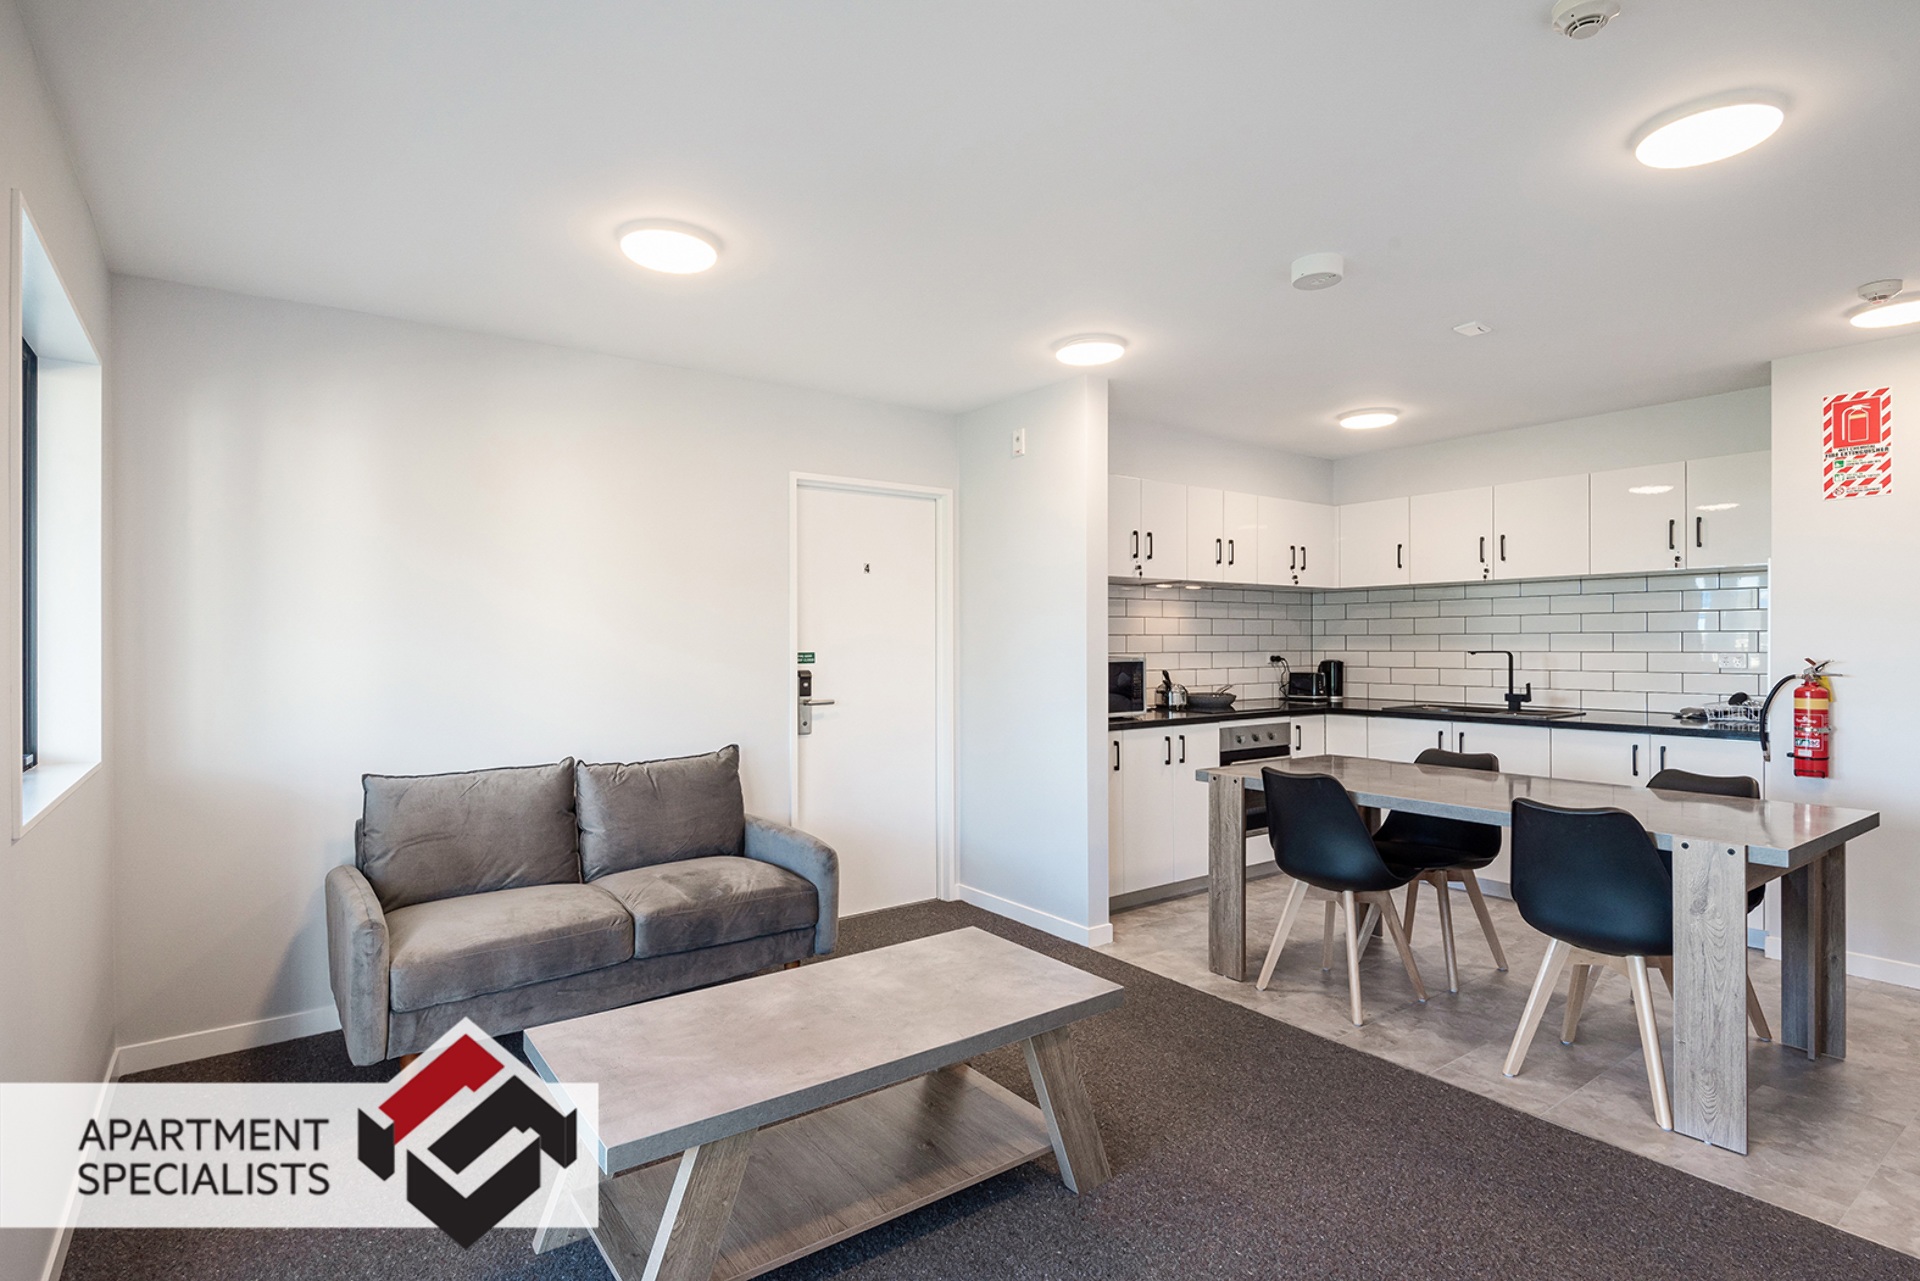 7 | 57 Henderson Valley Road, Henderson Valley | Apartment Specialists